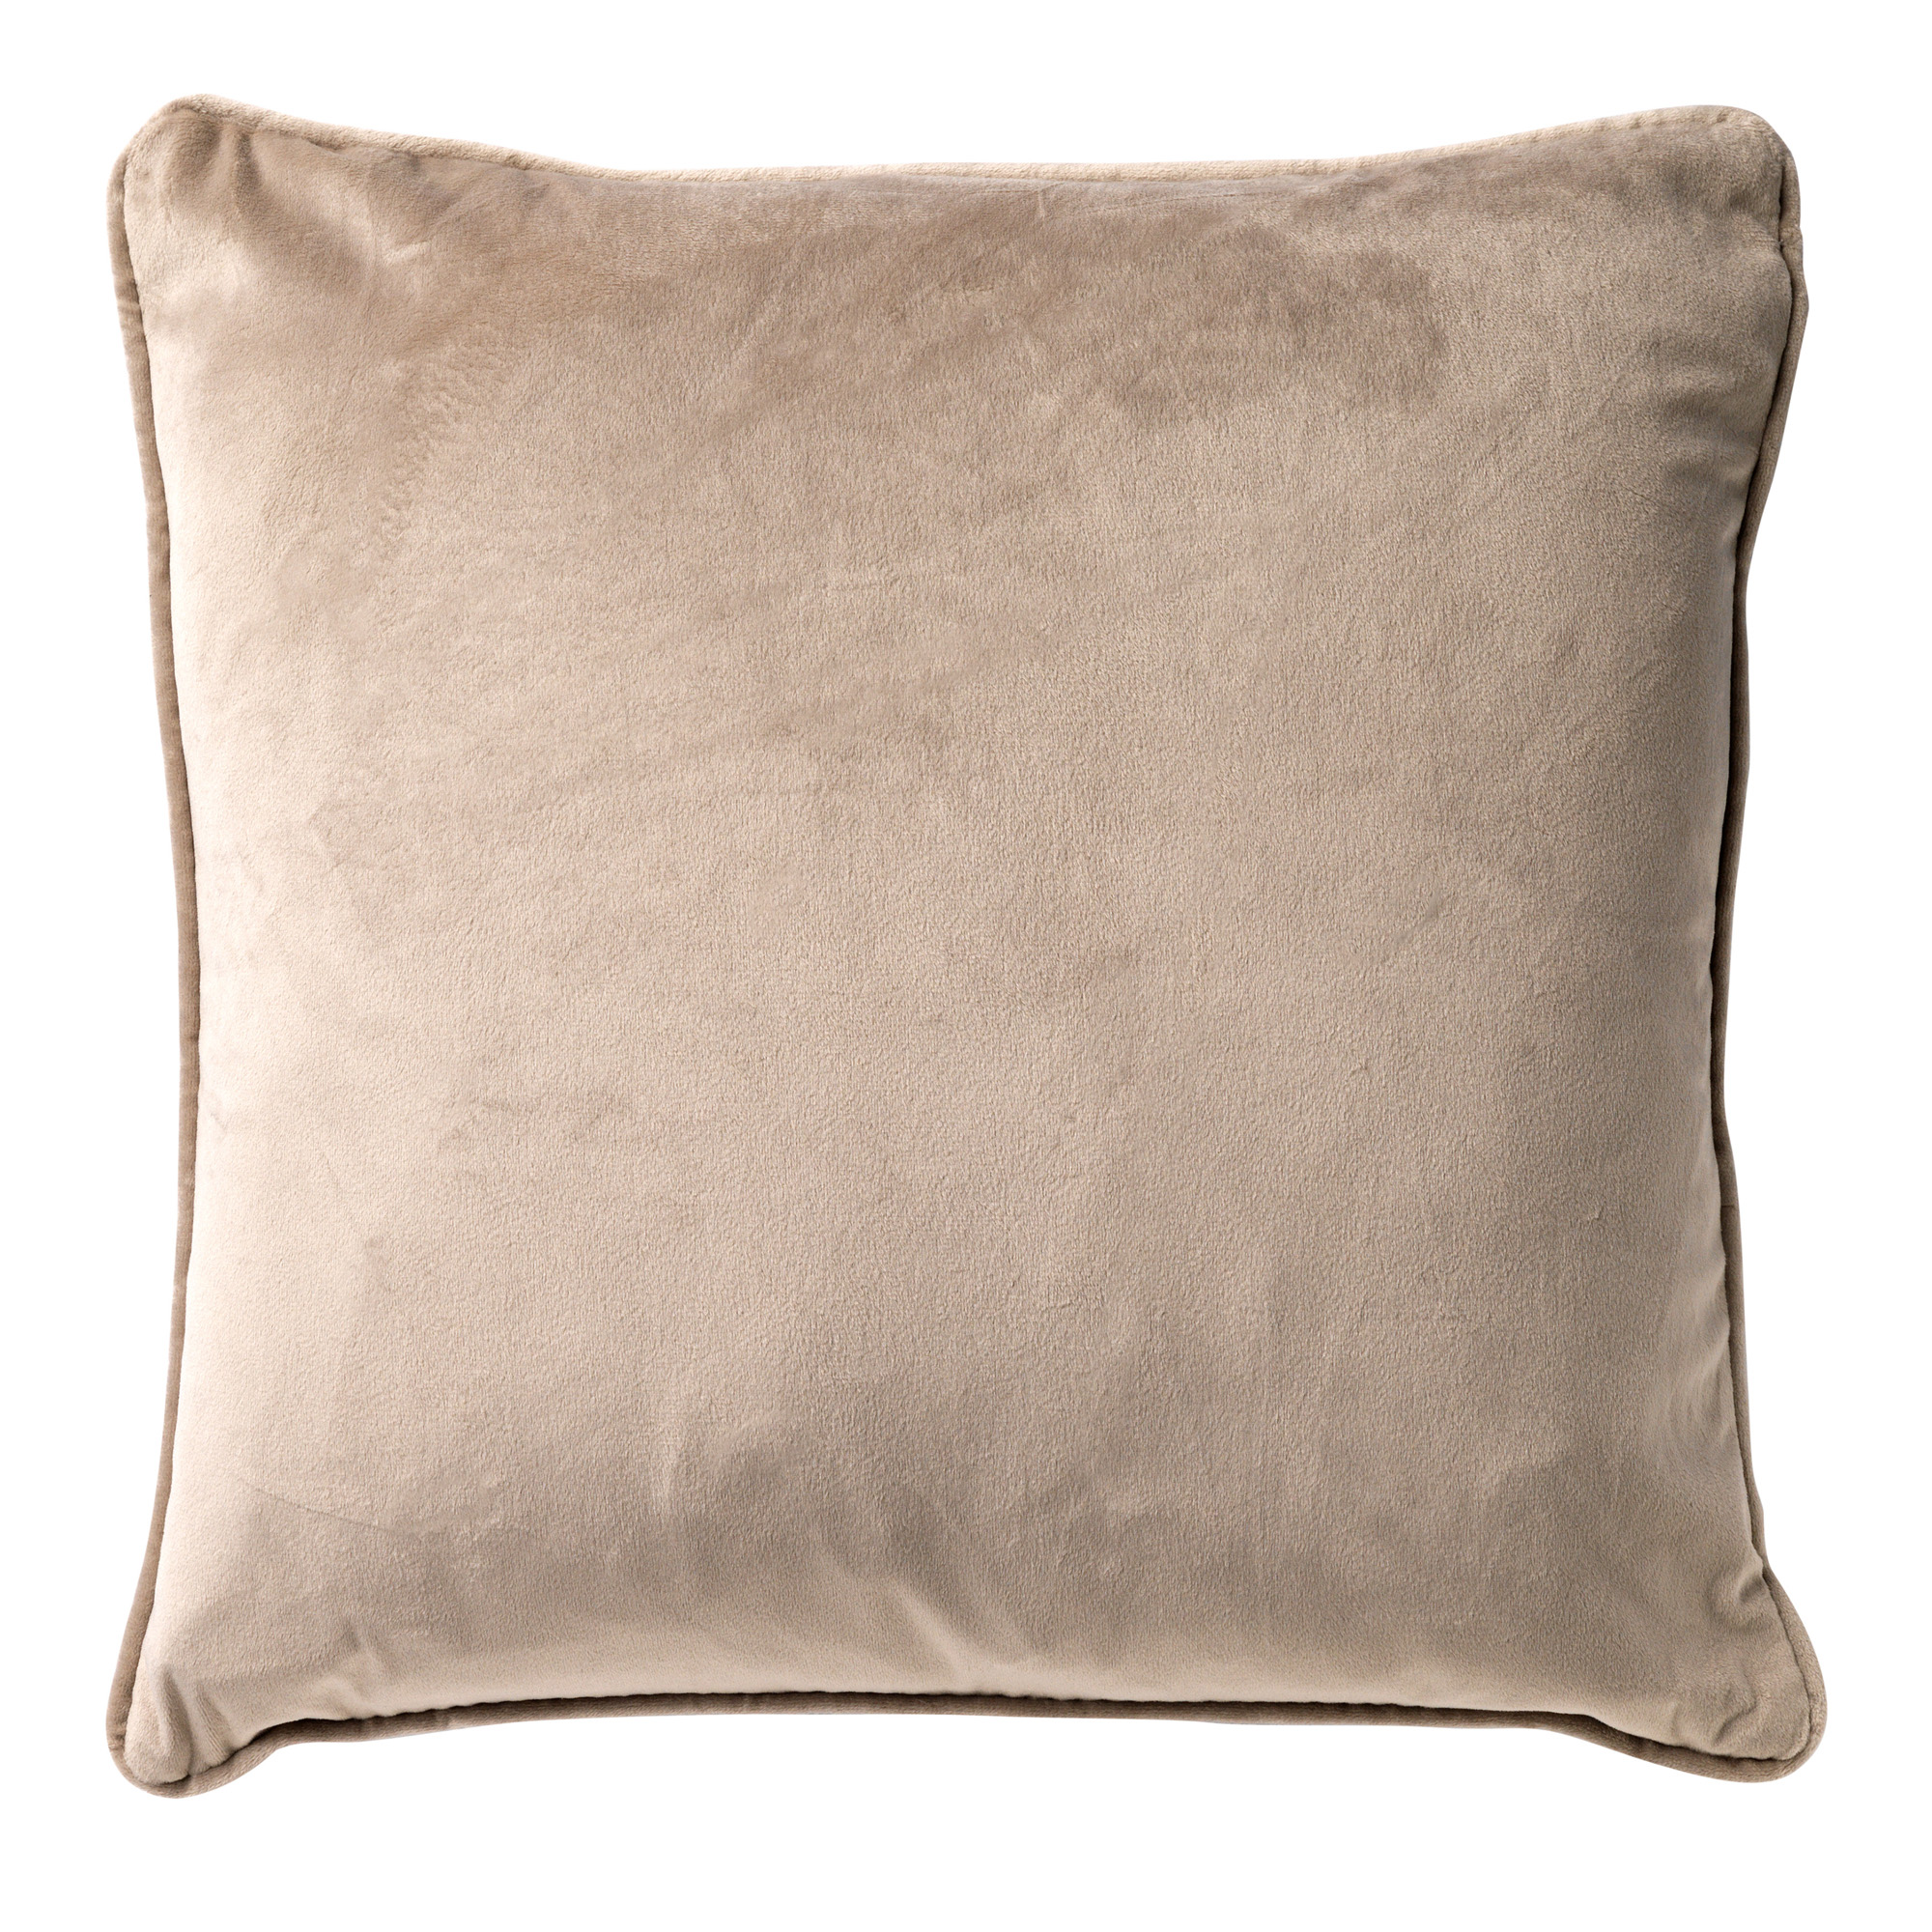 FINNA - Kussenhoes 100% gerecycled polyester - Eco Line collectie 45x45 cm - Pumice Stone - beige